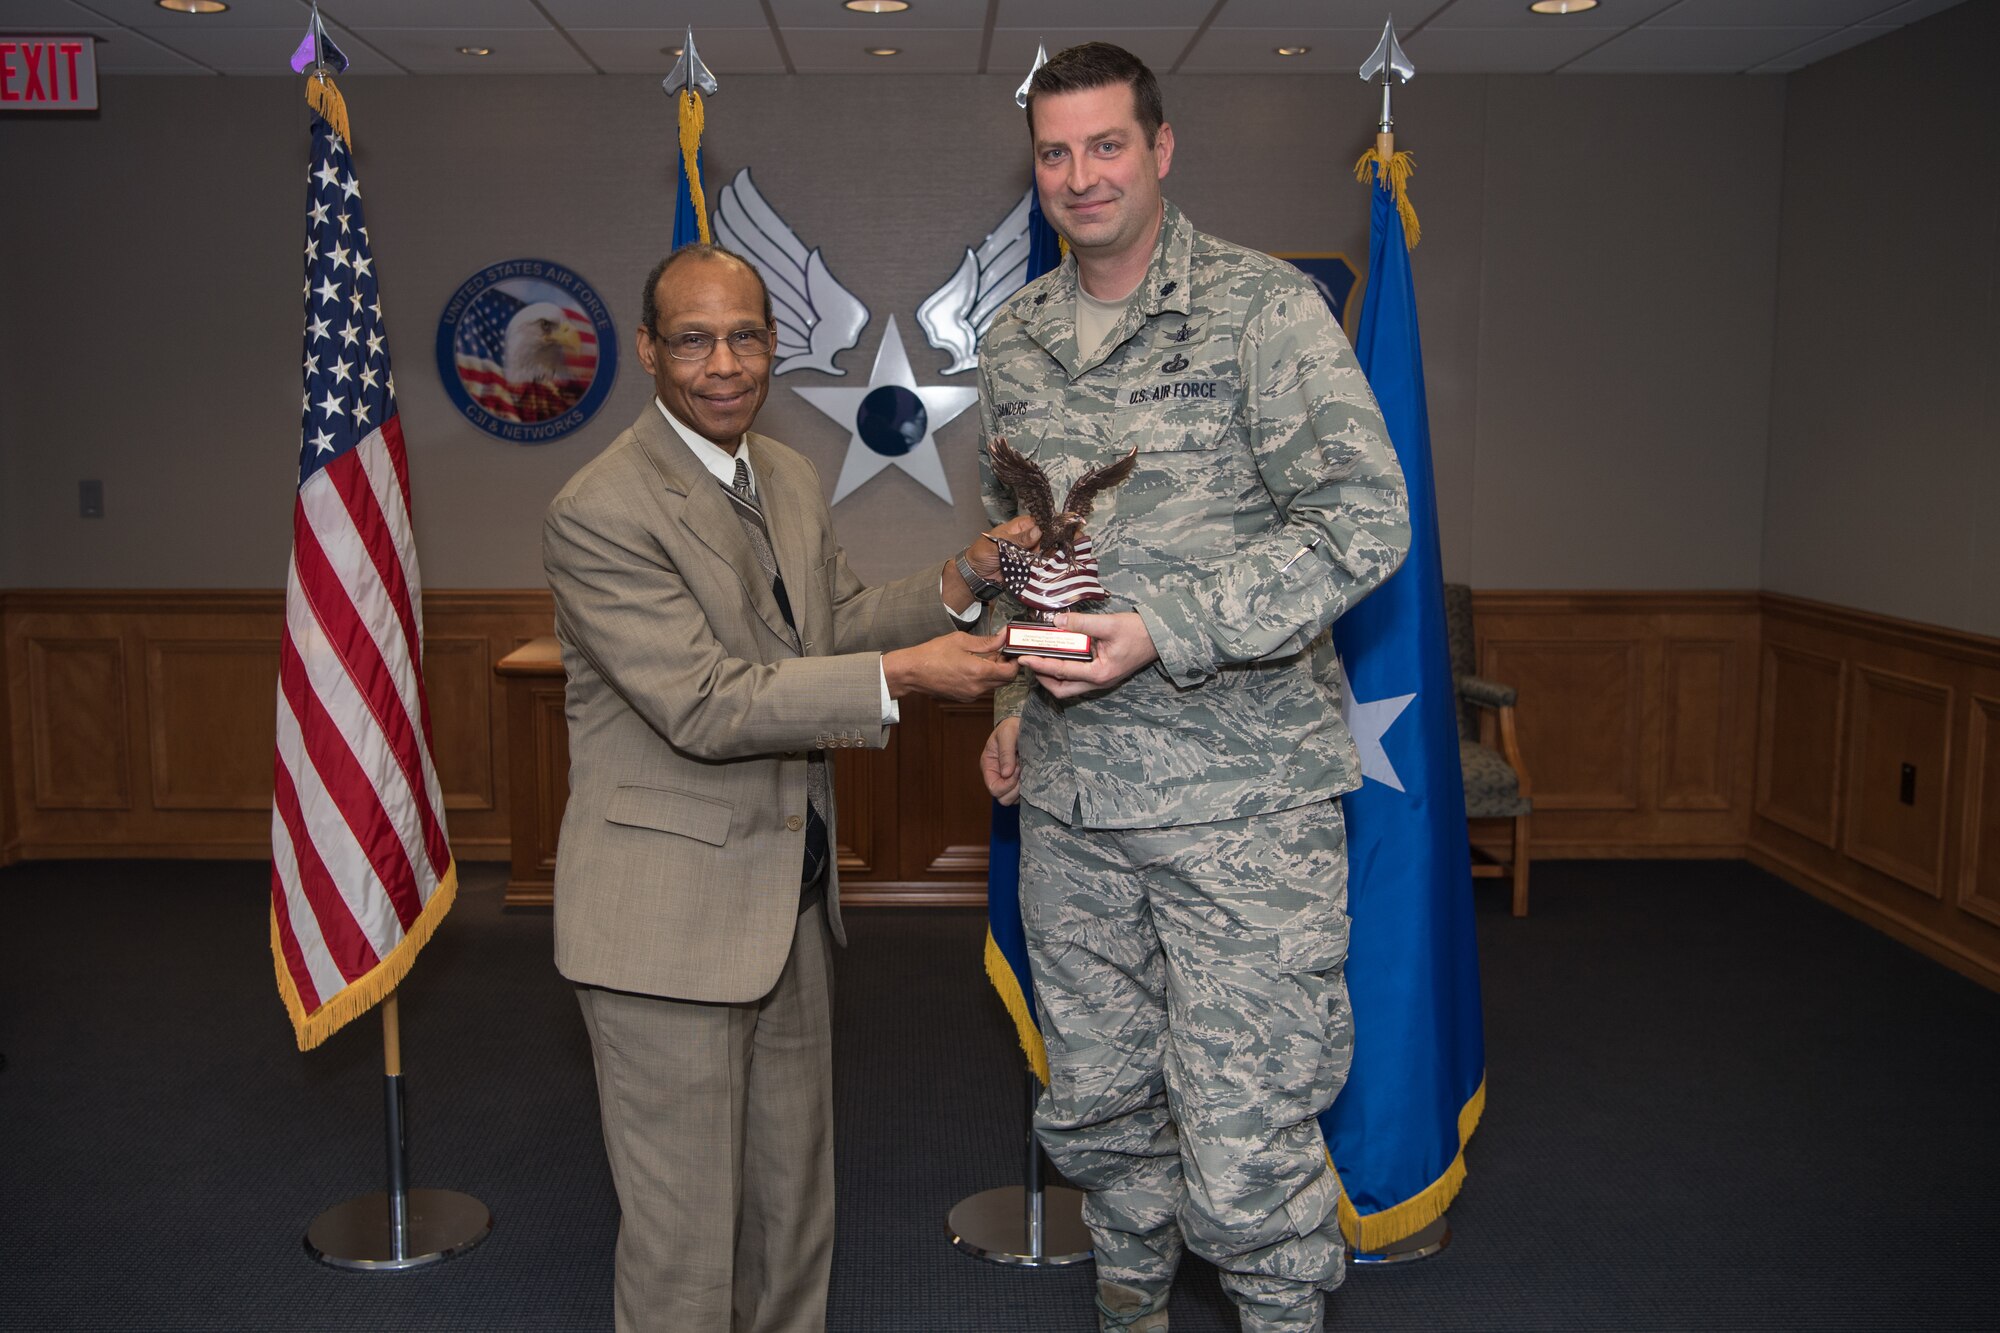 Program Executive Office Digital Program Management Senior Functional David Temple, left, presents the award for Outstanding Program Office to Lt. Col. Jeremiah Sanders, Air Operations Center weapons system senior materiel leader for PEO Digital, at the Air Force Life Cycle Management Center Program and Test Management annual awards, broadcast to Hanscom Air Force Base, Mass., Nov. 14. Sanders accepted two awards on behalf of the Project Kessel Run team and his program office, each of which were recognized for designing applications used by combatant commanders to orchestrate air operations in the Middle East and worldwide. (U.S. Air Force photo by Jerry Saslav)